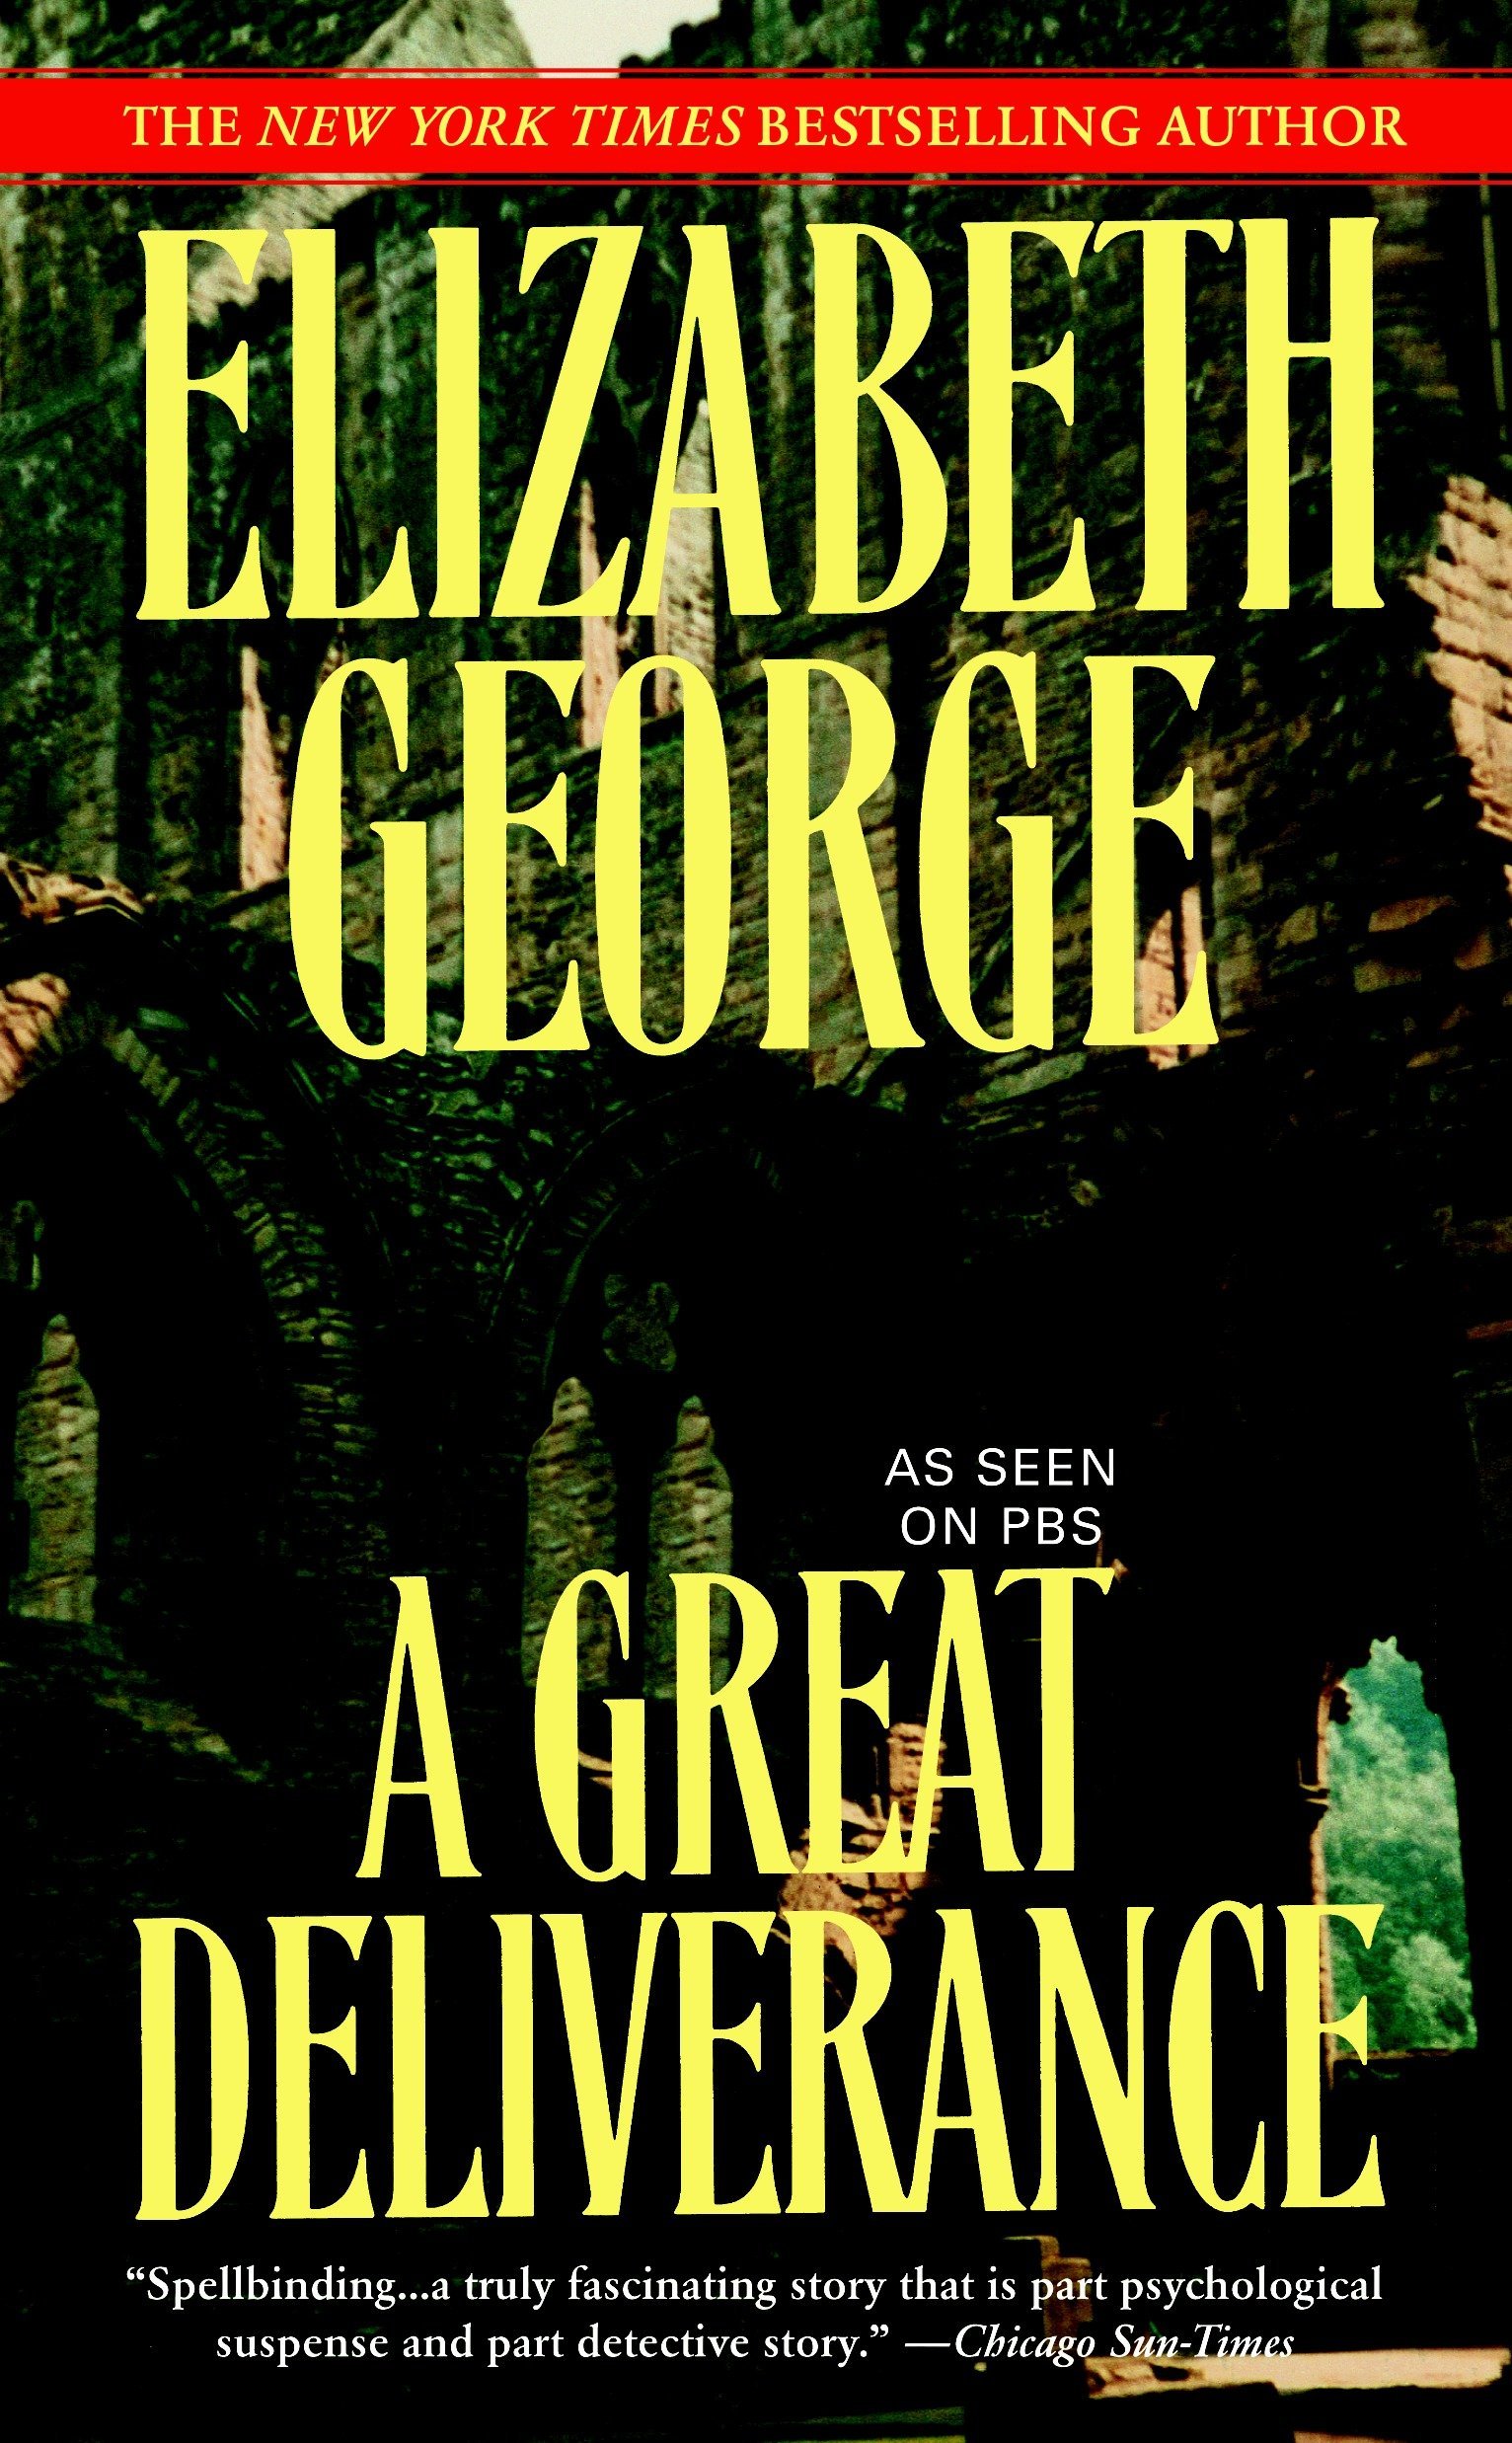 Cover for "A Great Deliverance" by Elizabeth George